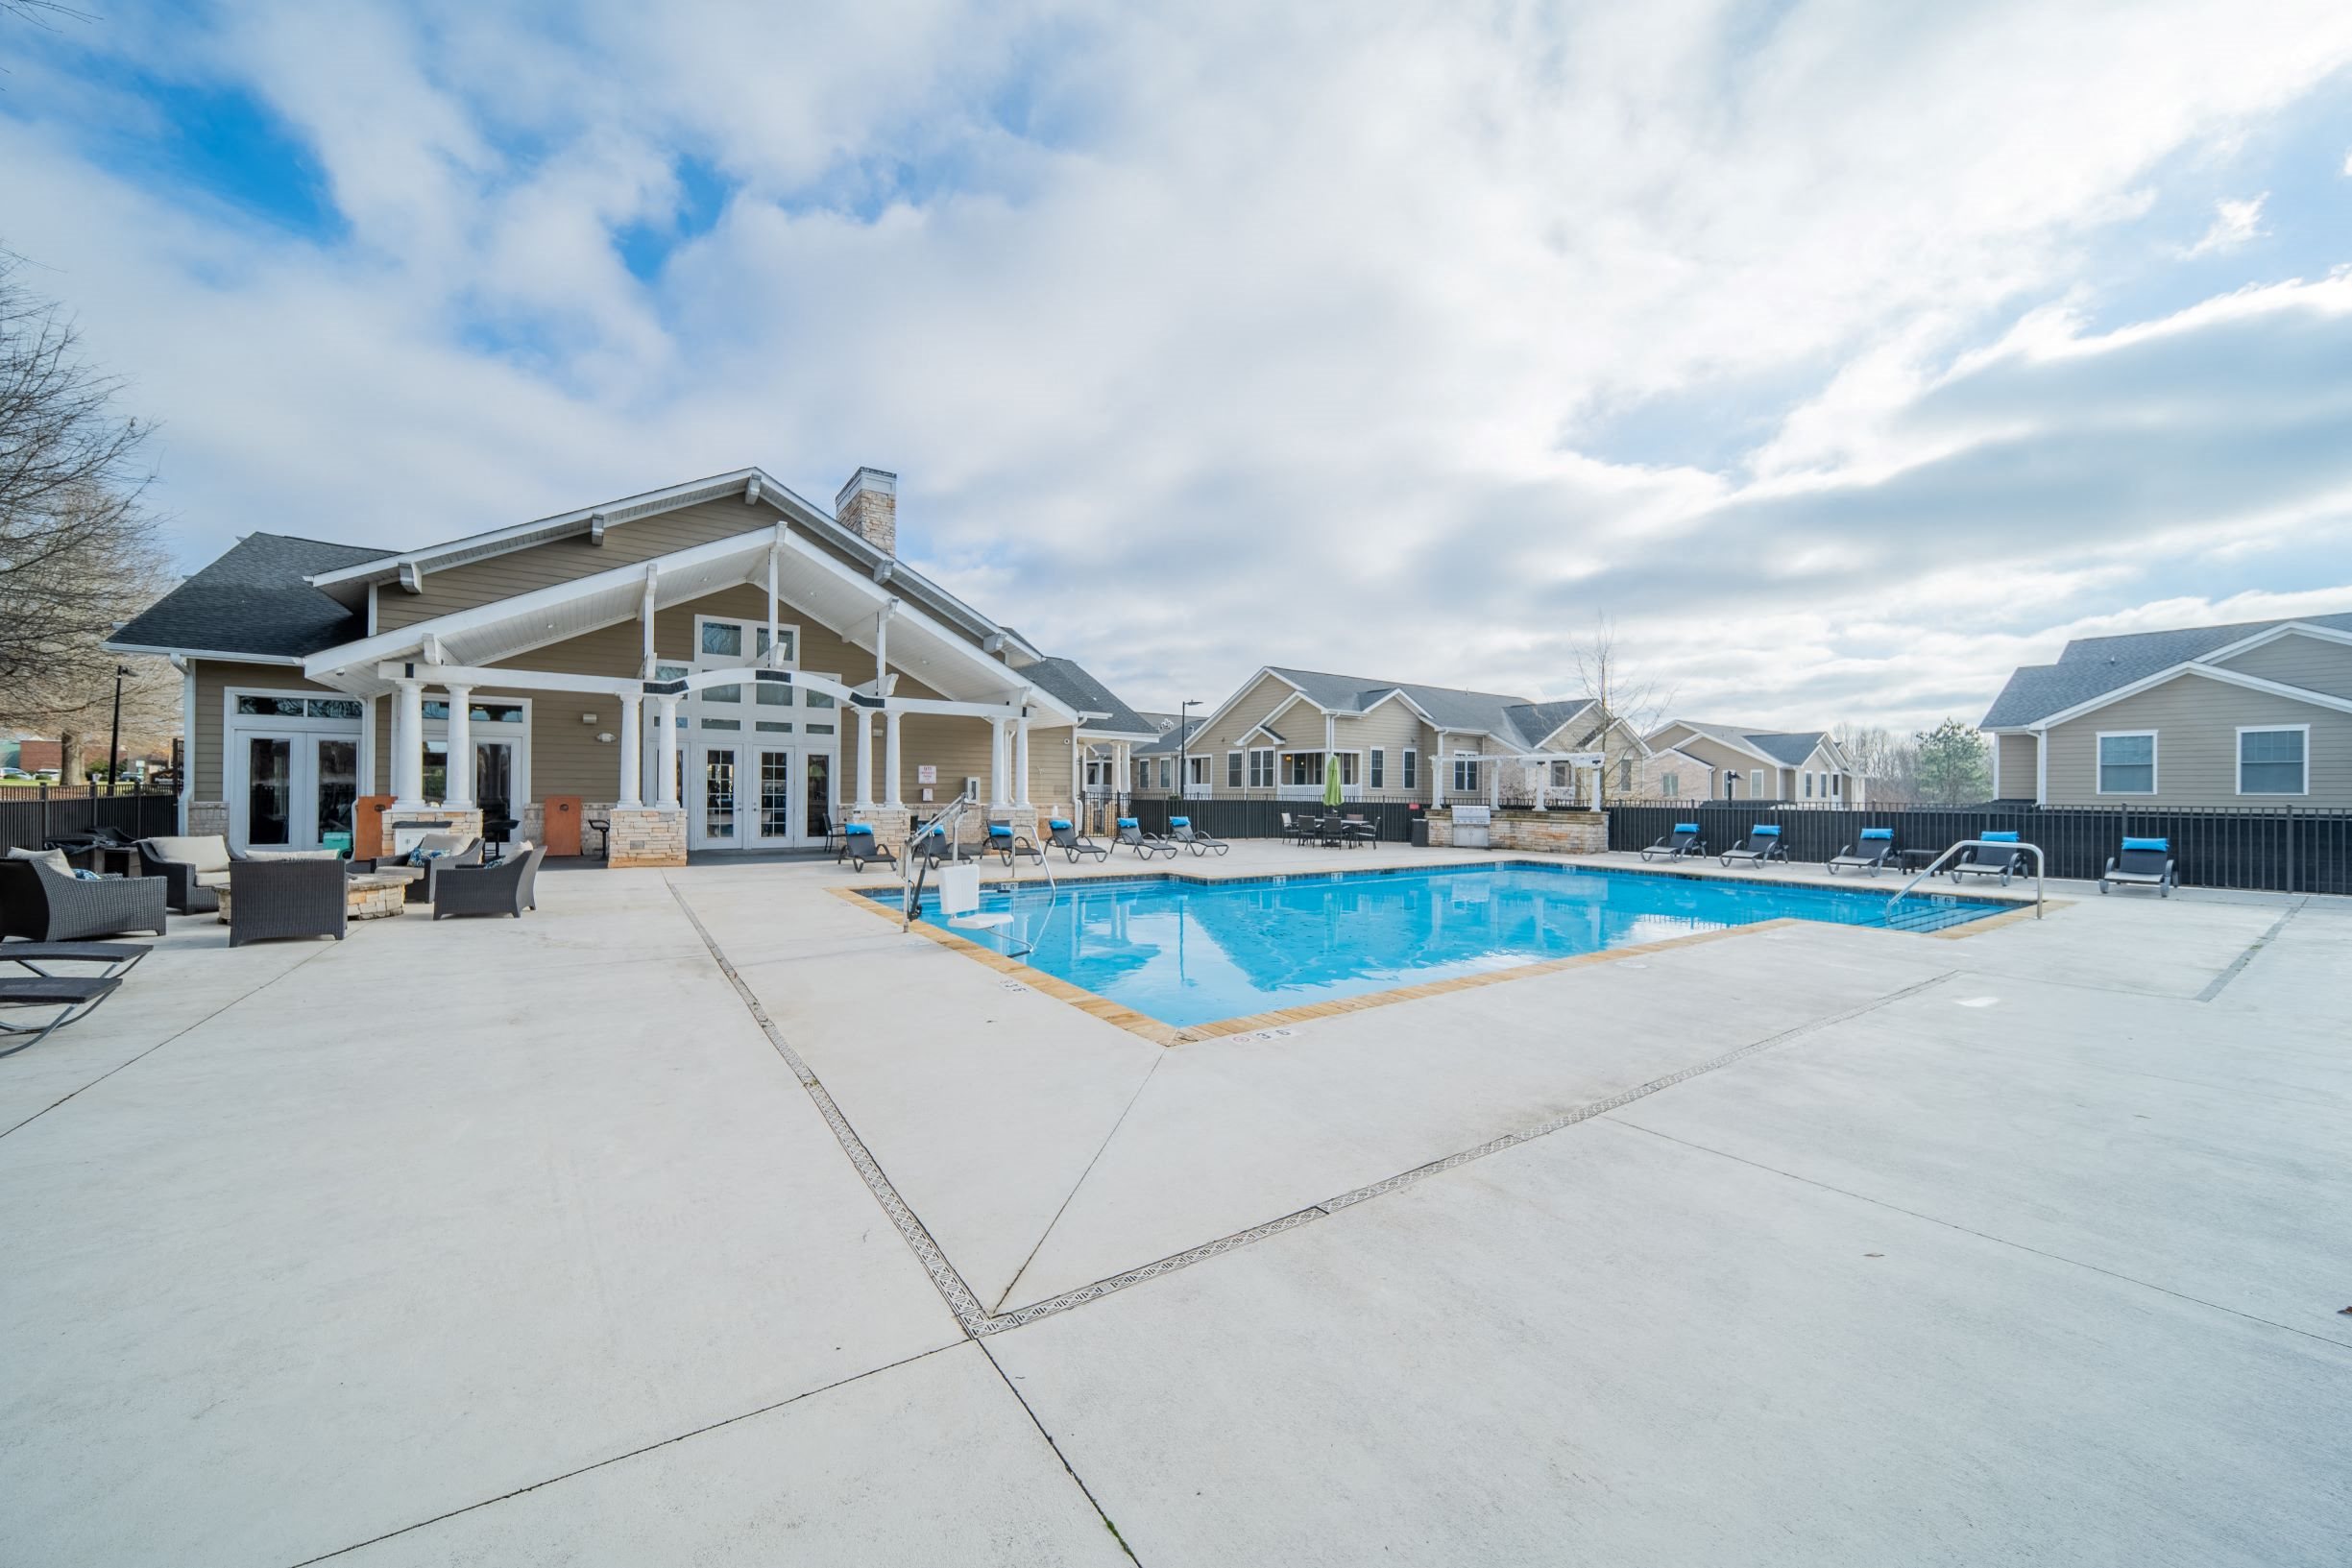 Sparkling swimming pool and spacious sundeck at Piedmont Place apartments in Greensboro, NC